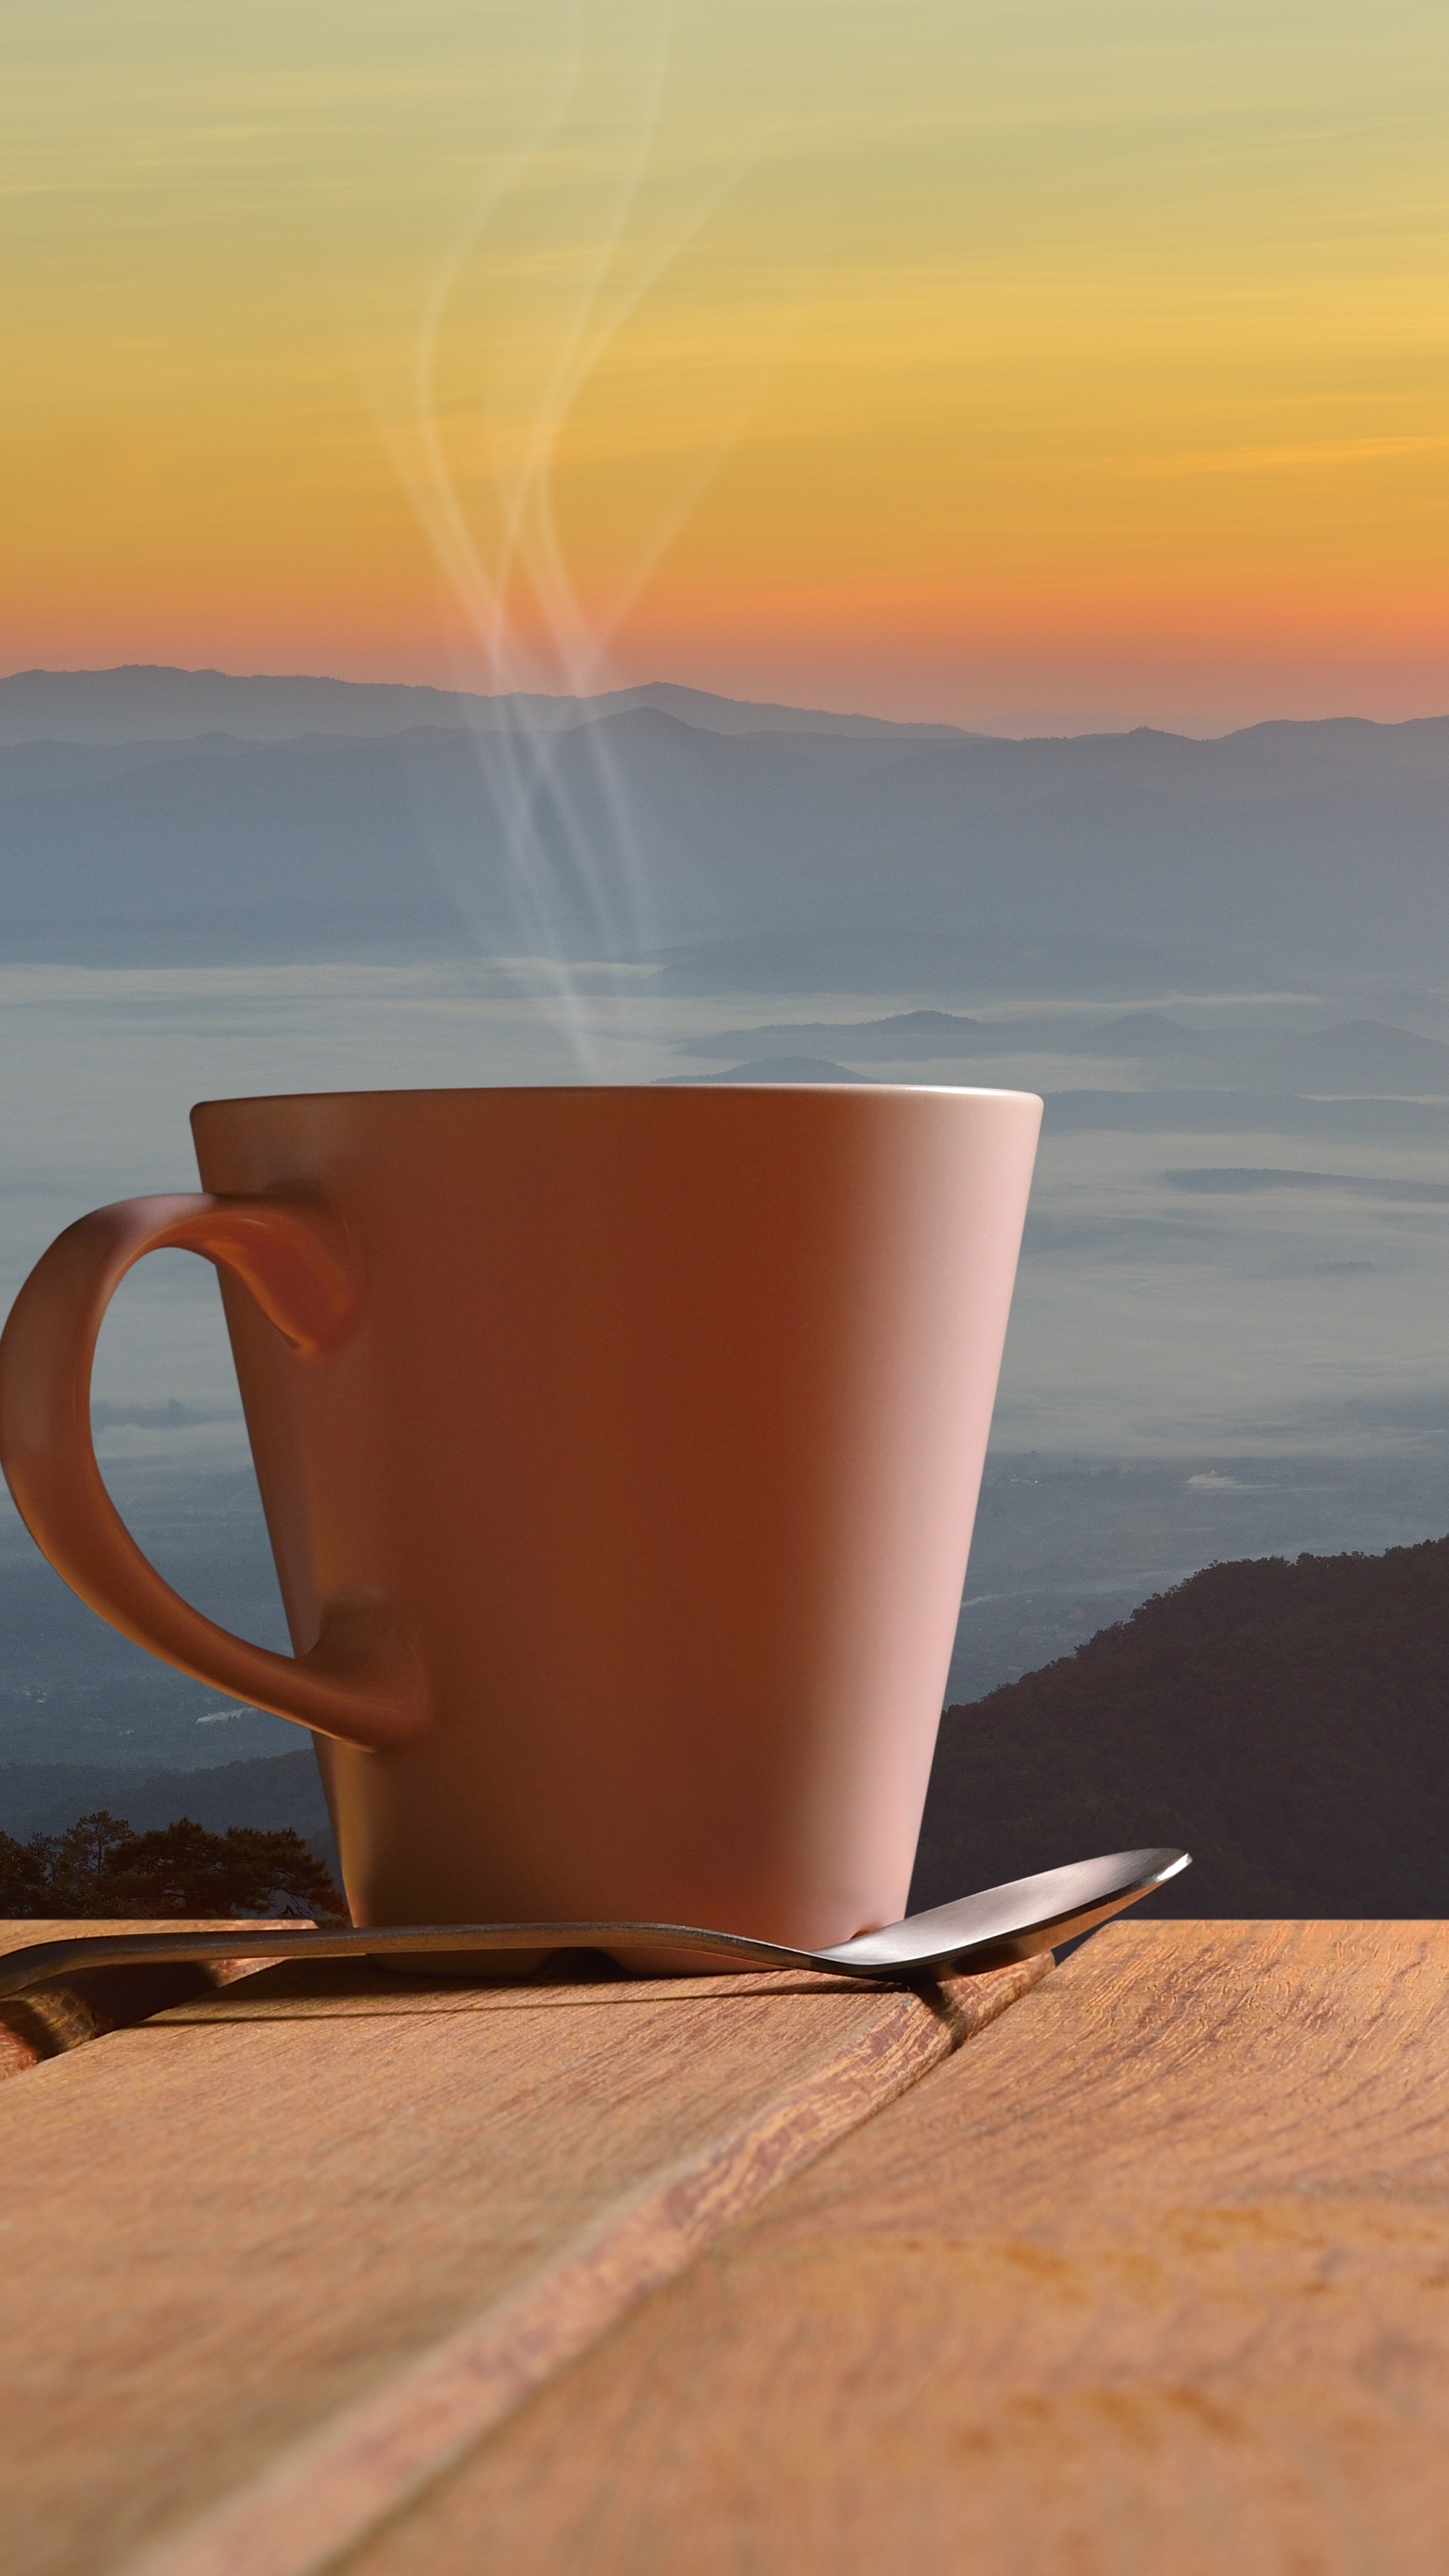 Morning coffee, Xperia wallpapers, Premium image quality, Sunlit ambiance, 2160x3840 4K Phone